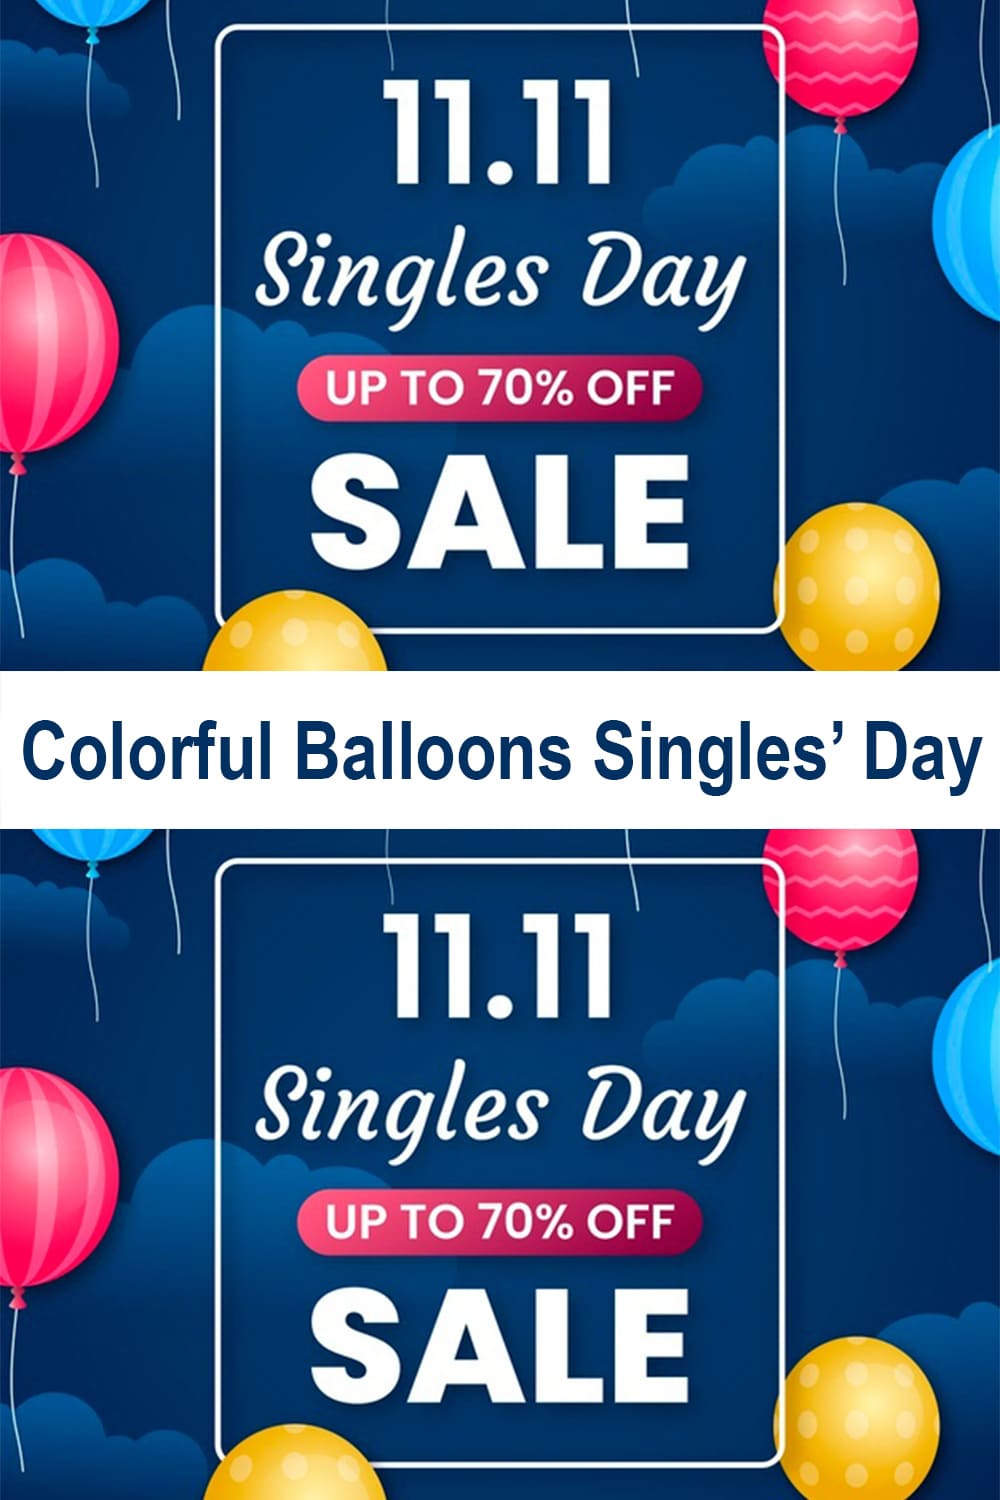 Colorful Balloons Singles' Day Free Vector.